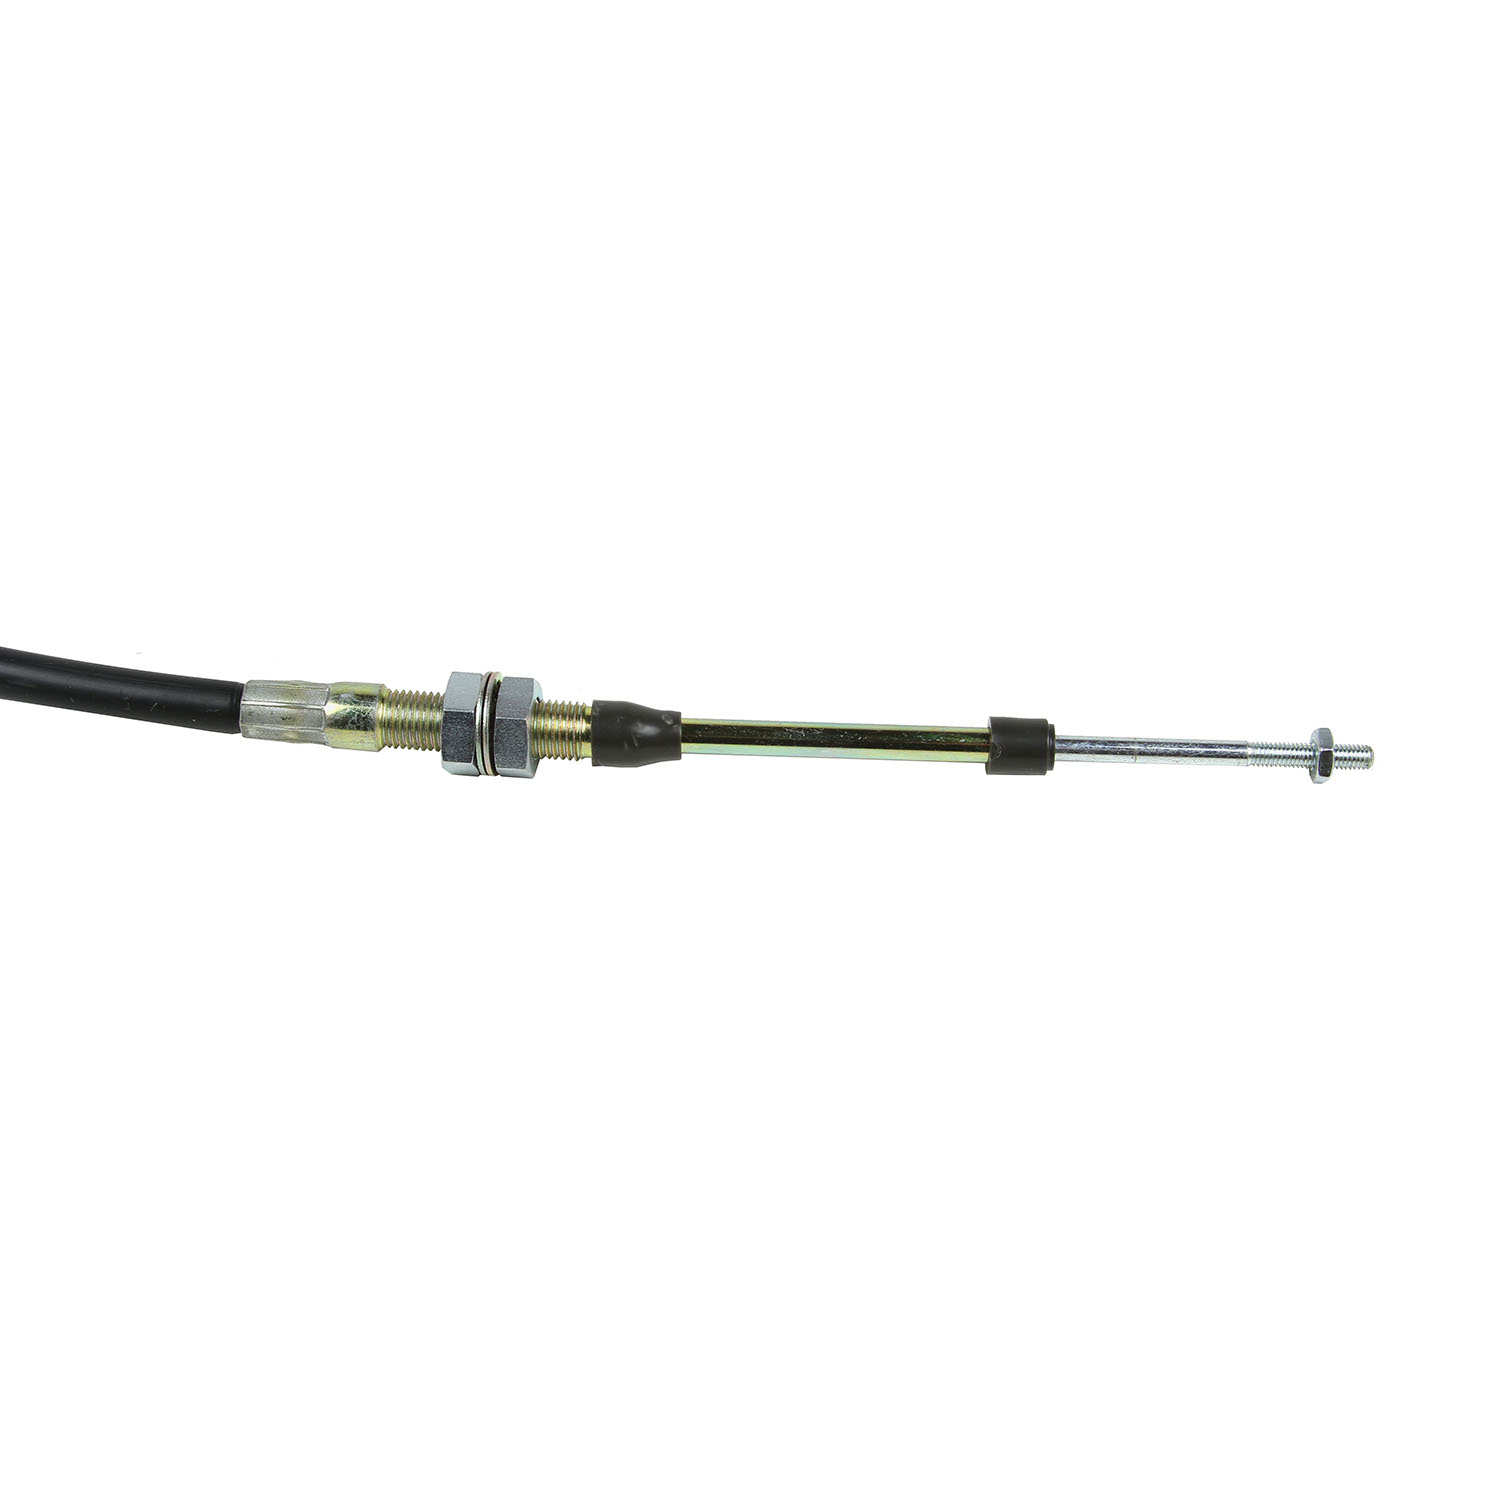 B&M PERFORMANCE SHIFTER CABLE 5-FOOT LENGTH - BLACK 